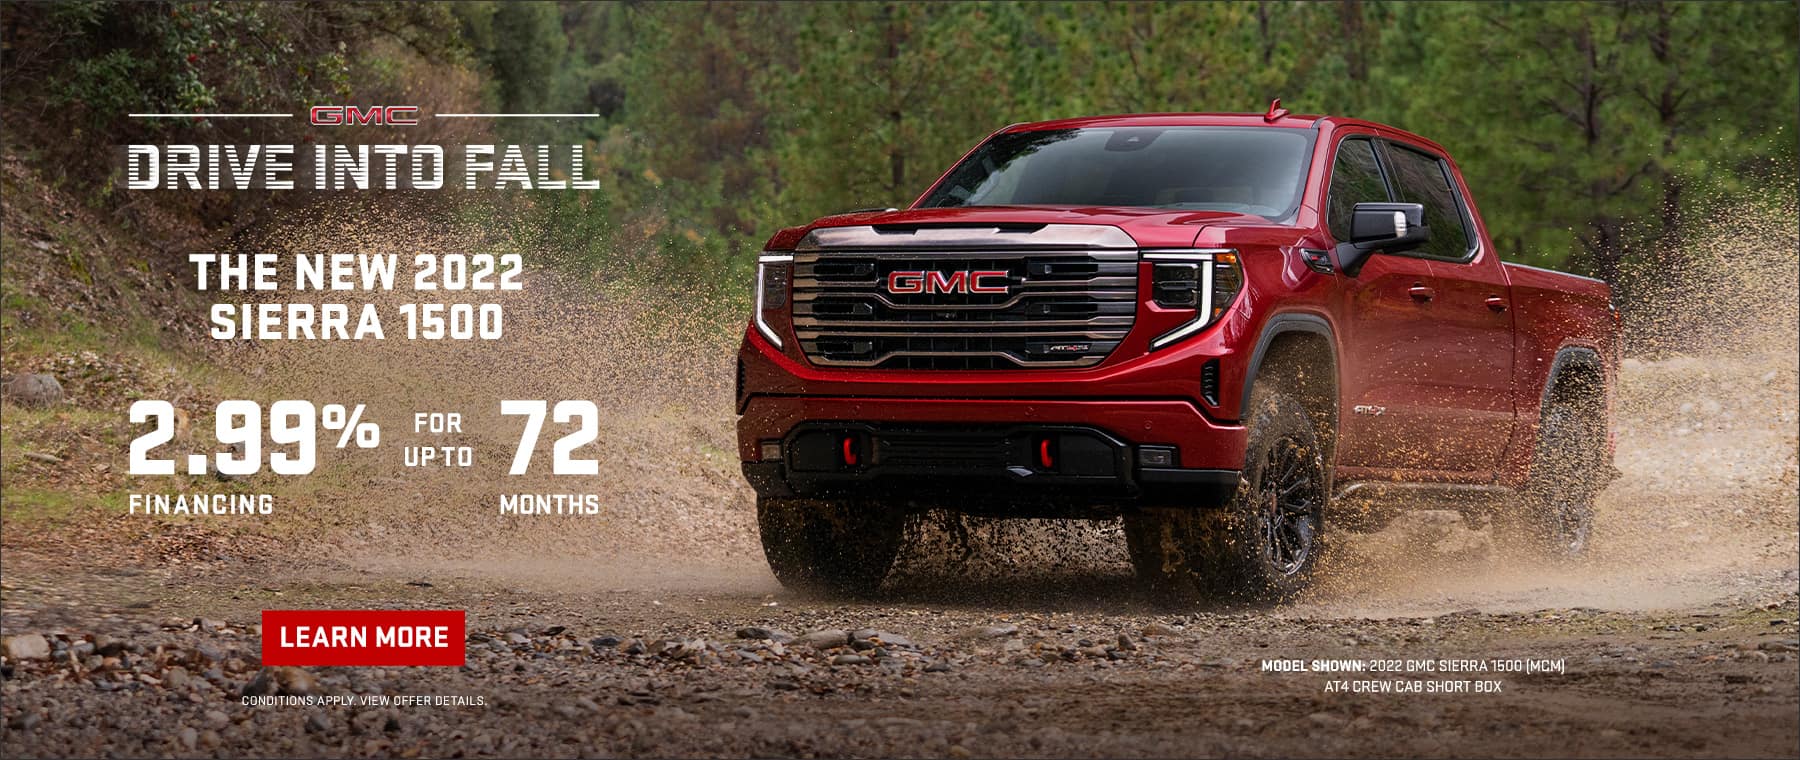 Drive Into Fall – The New 2022 GMC Sierra 1500